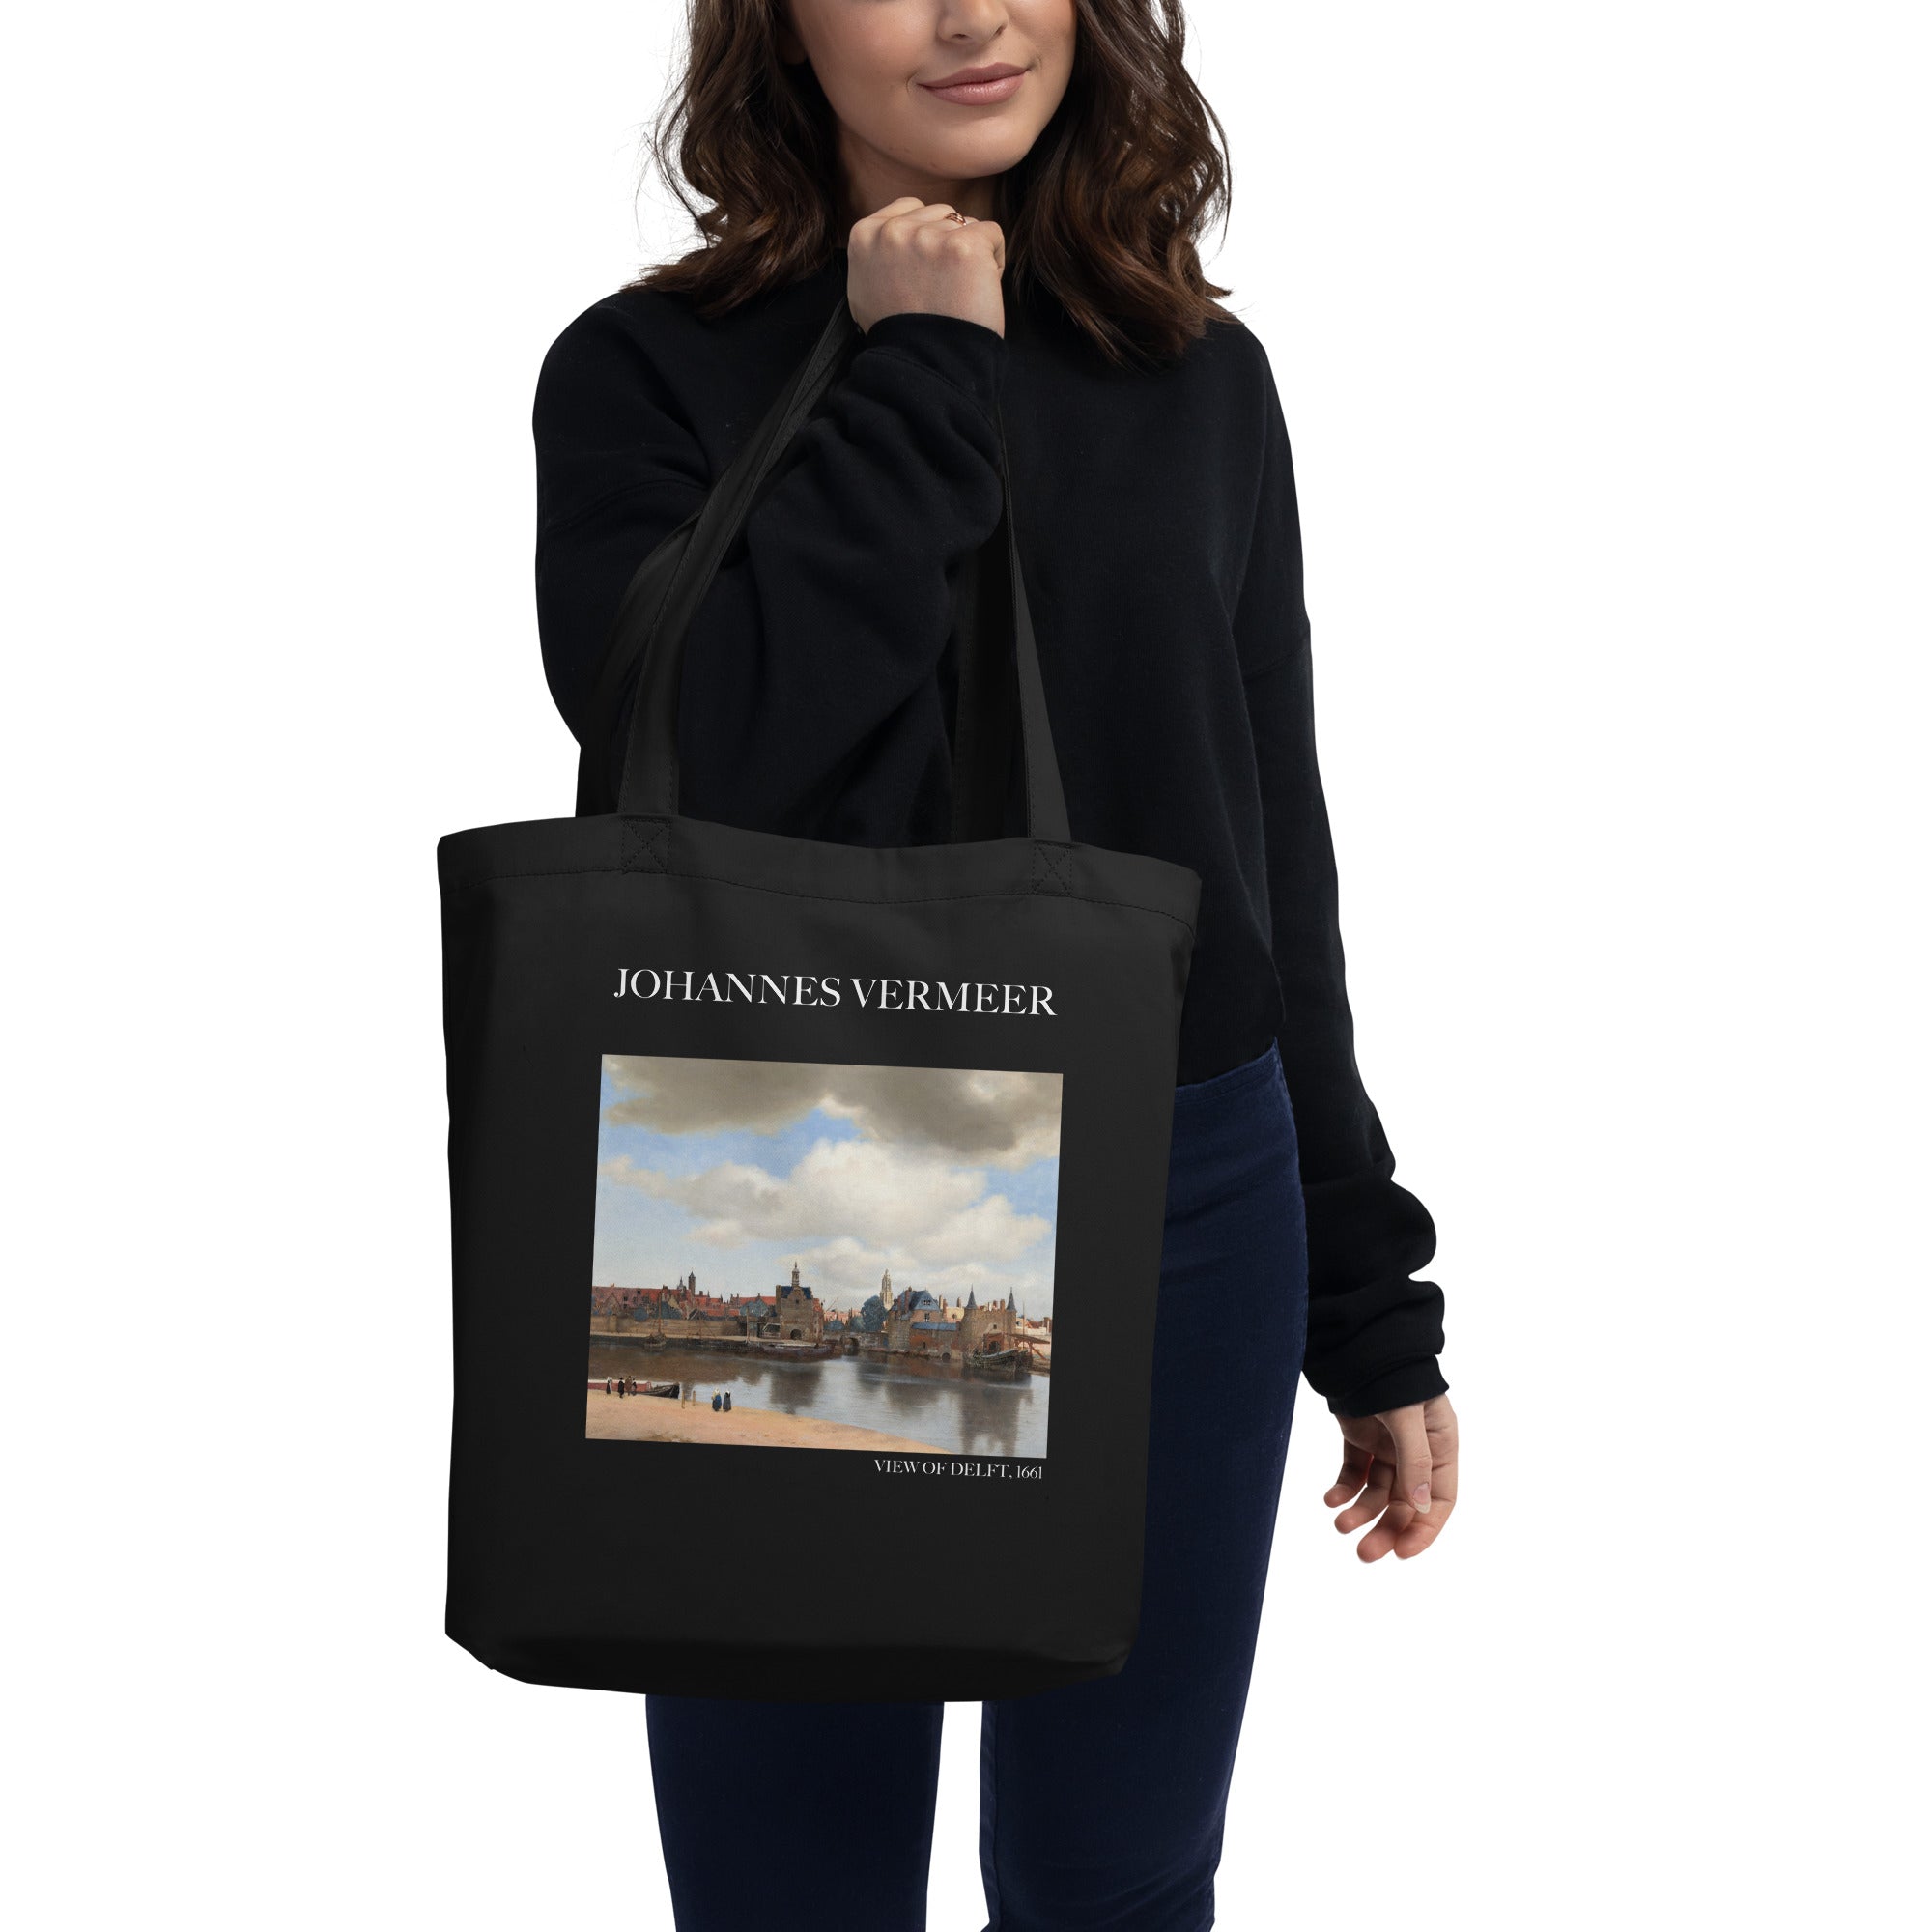 Johannes Vermeer 'View of Delft' Famous Painting Totebag | Eco Friendly Art Tote Bag